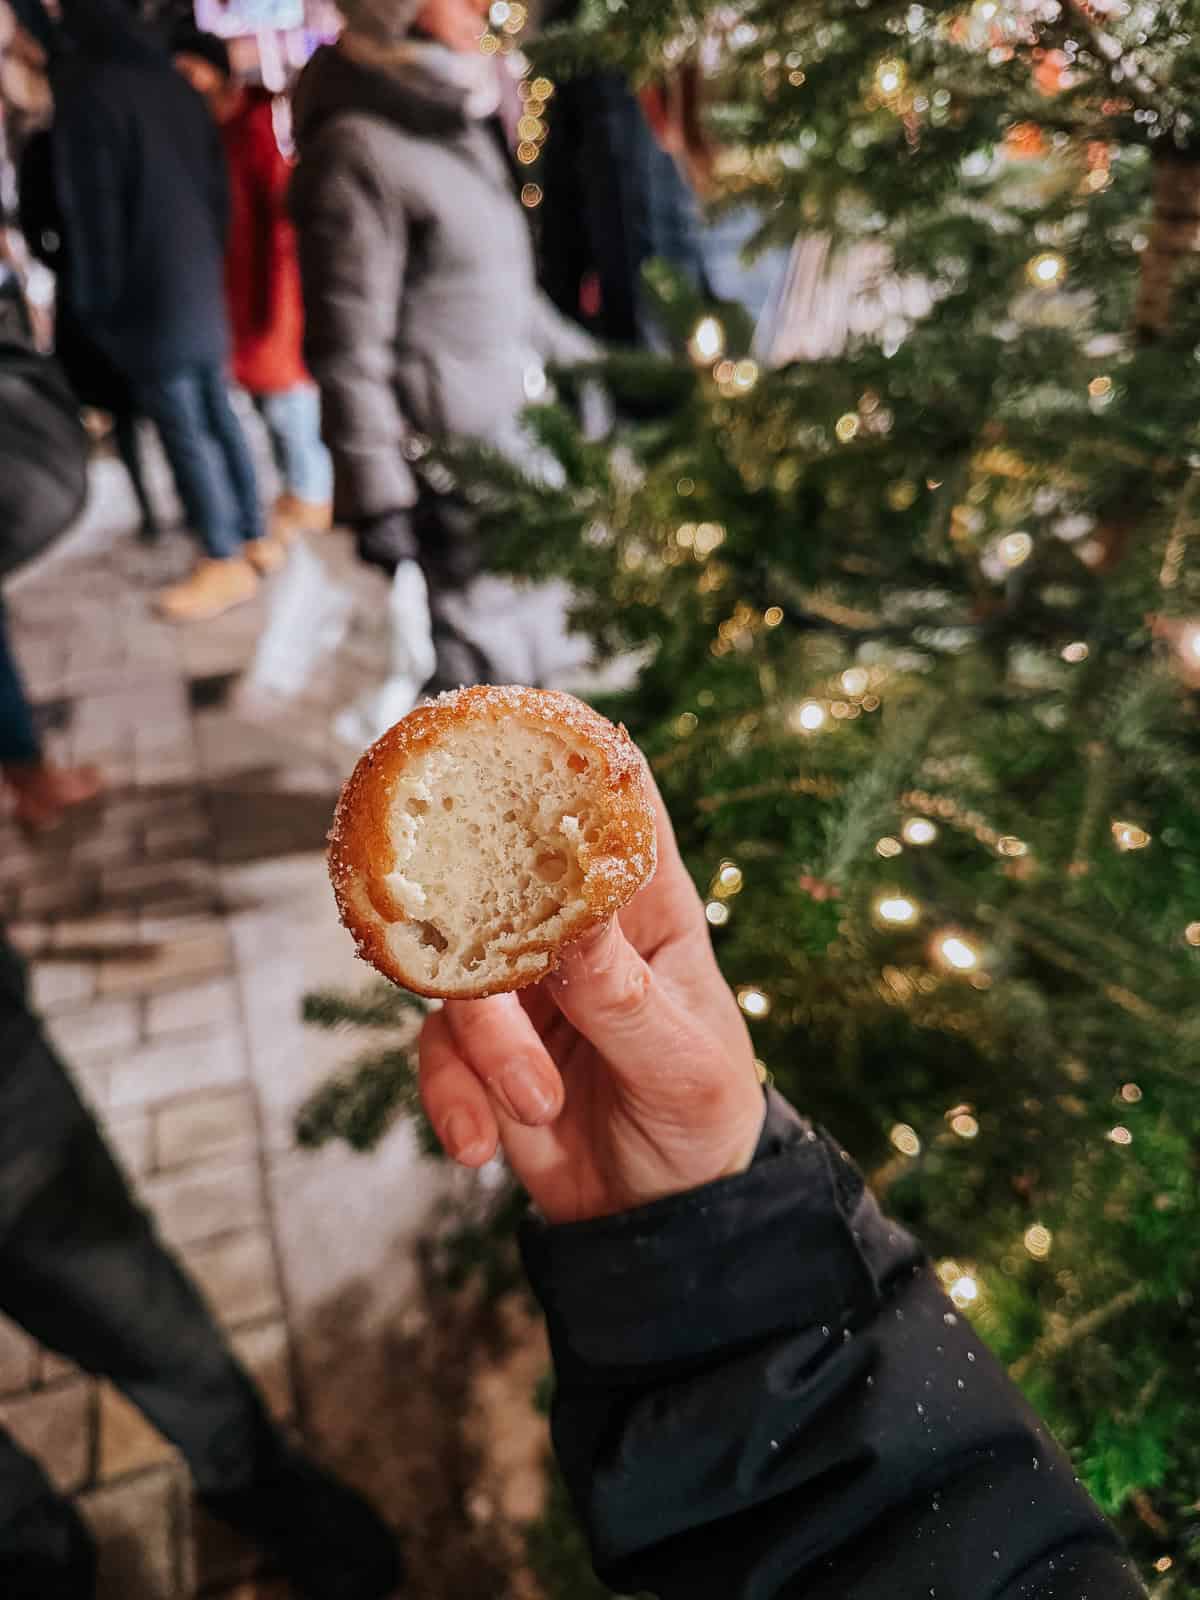 A close-up of a hand holding a bitten quark ball with the creamy filling visible, set against a festive backdrop of a decorated Christmas tree.